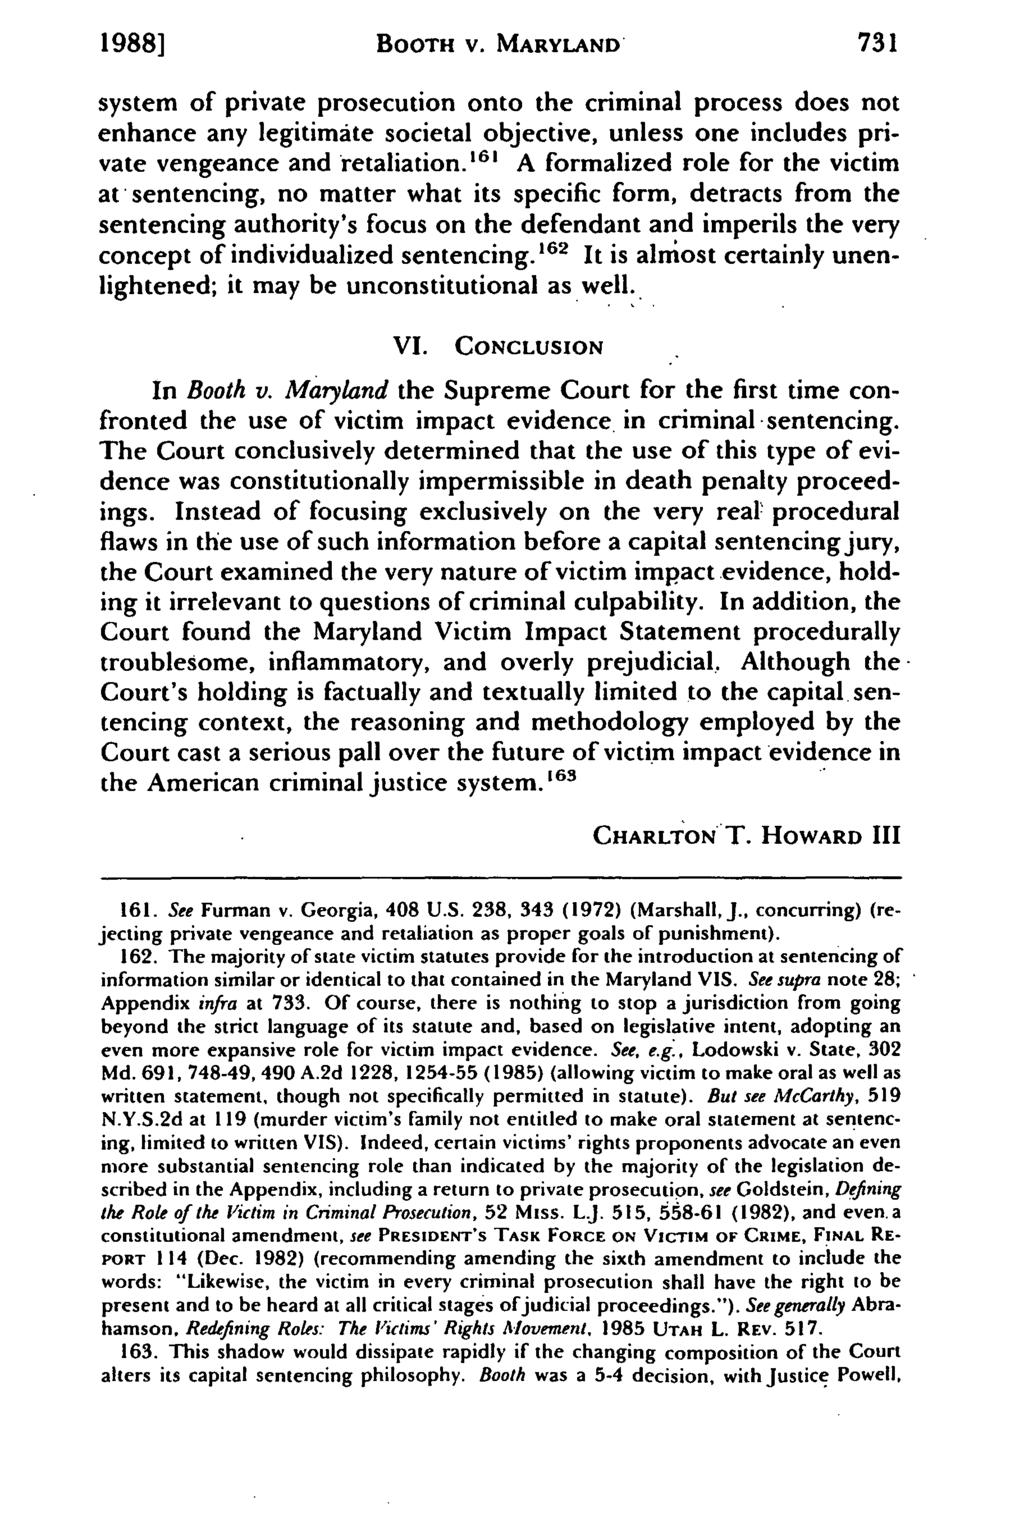 1988] BOOTH V. MARYLAND system of private prosecution onto the criminal process does not enhance any legitimate societal objective, unless one includes private vengeance and retaliation.